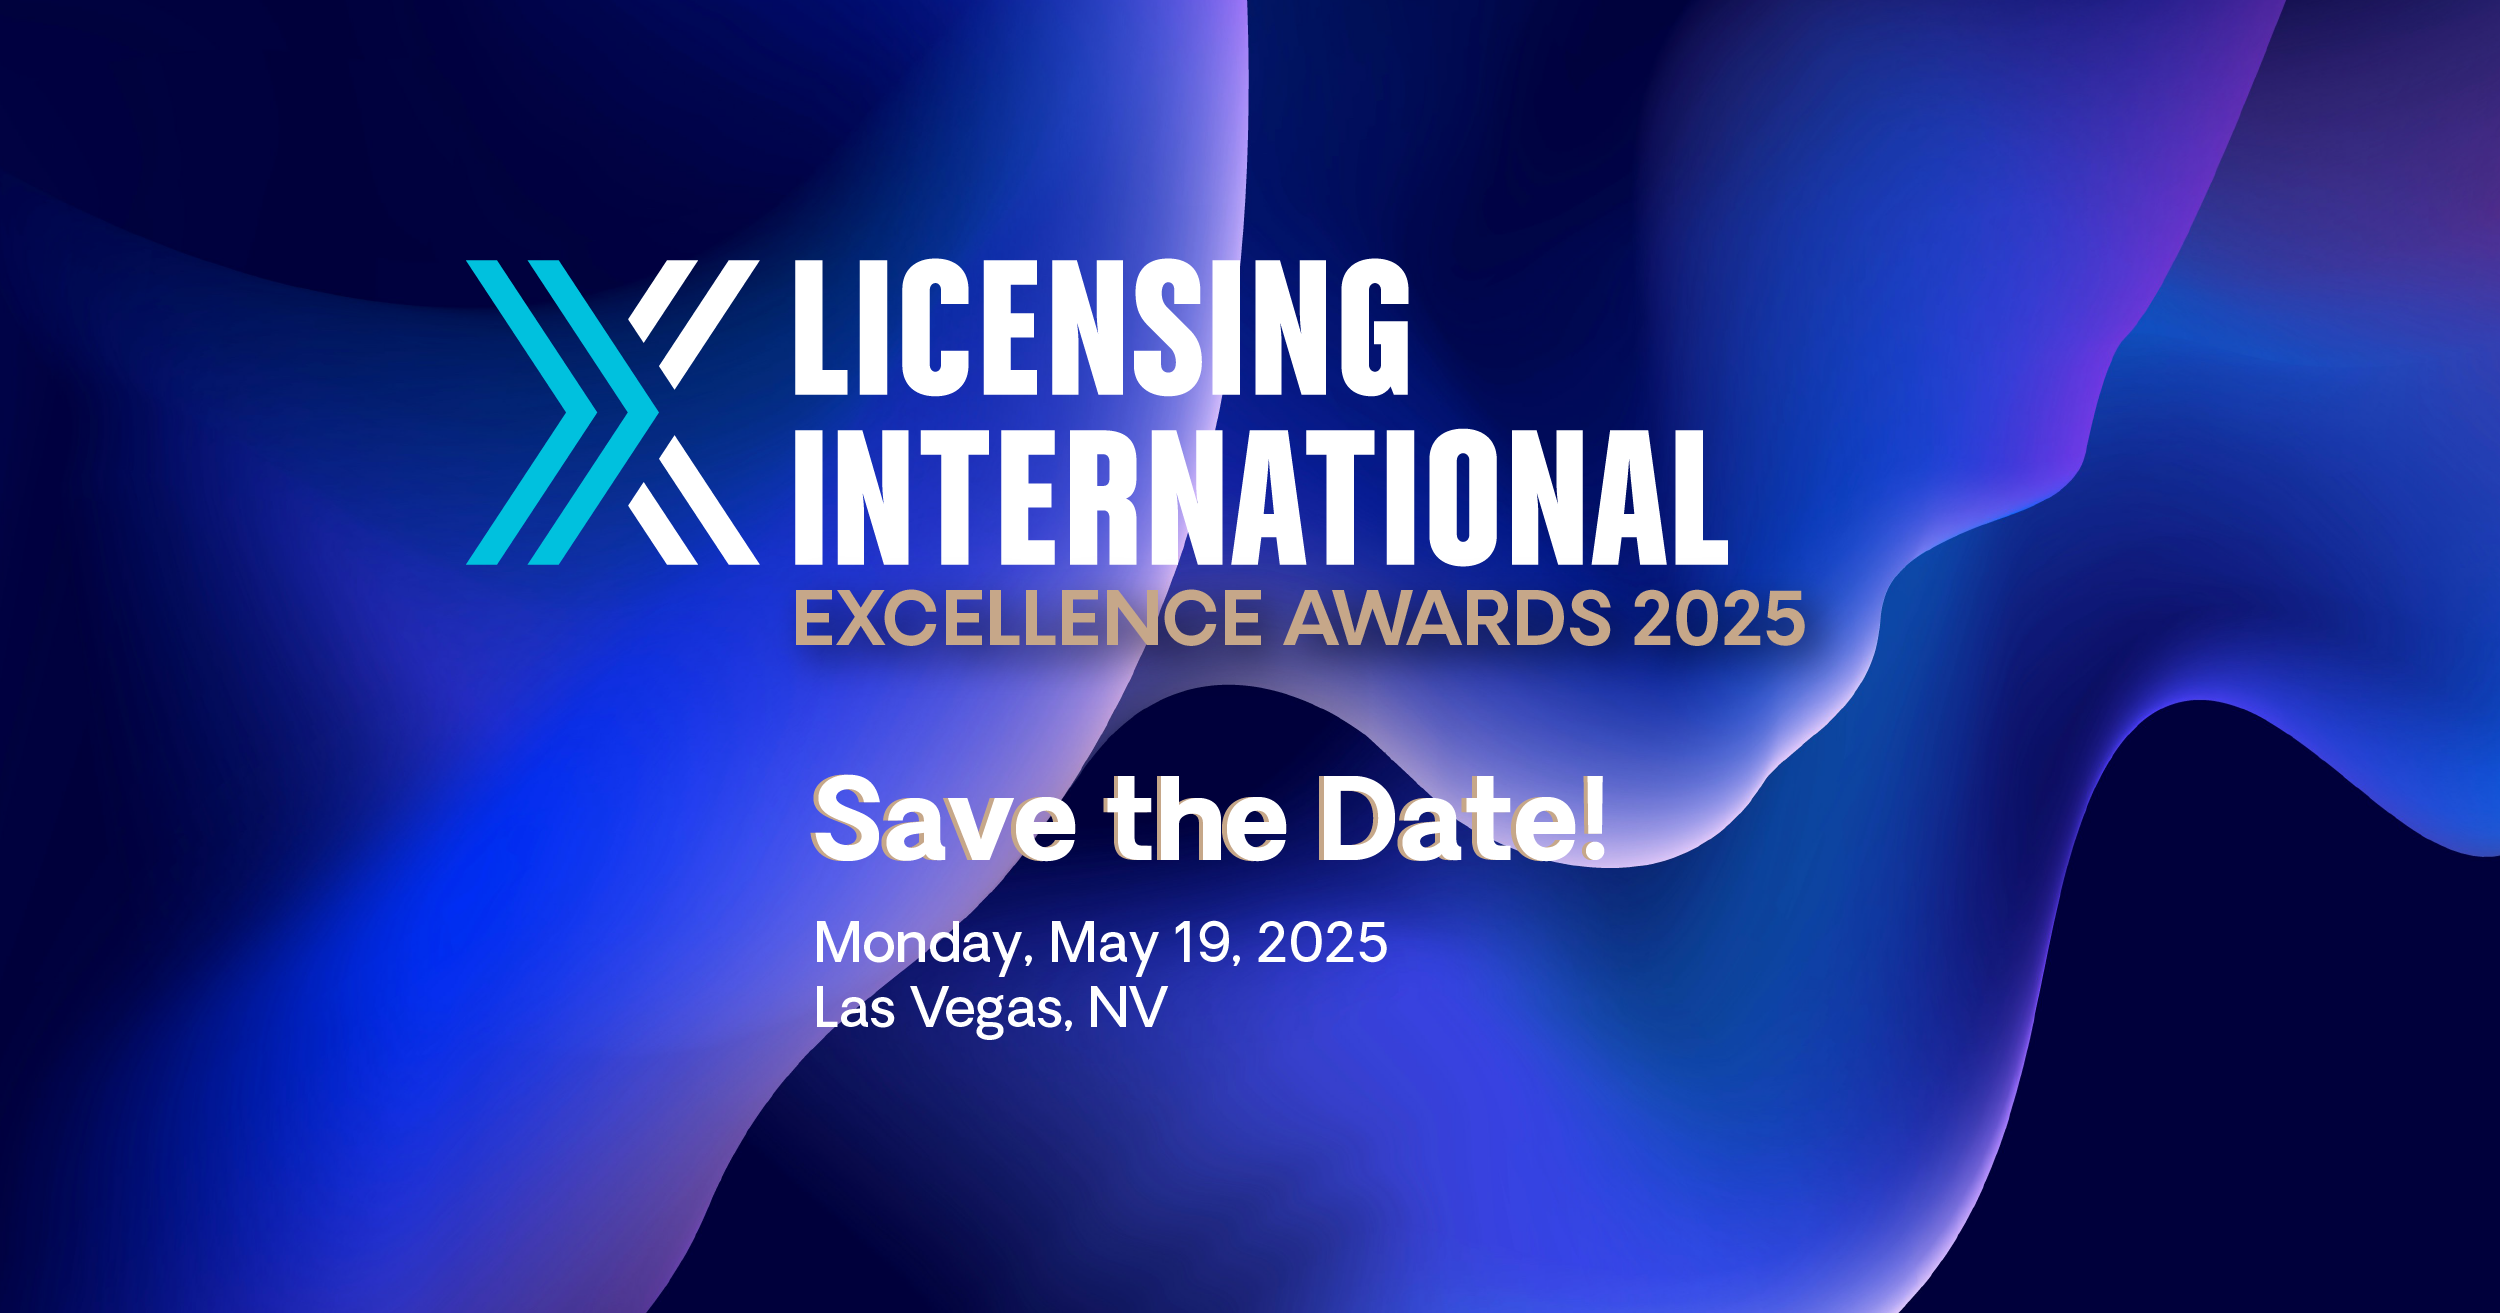 Licensing Excellence Awards 2025 Ceremony image